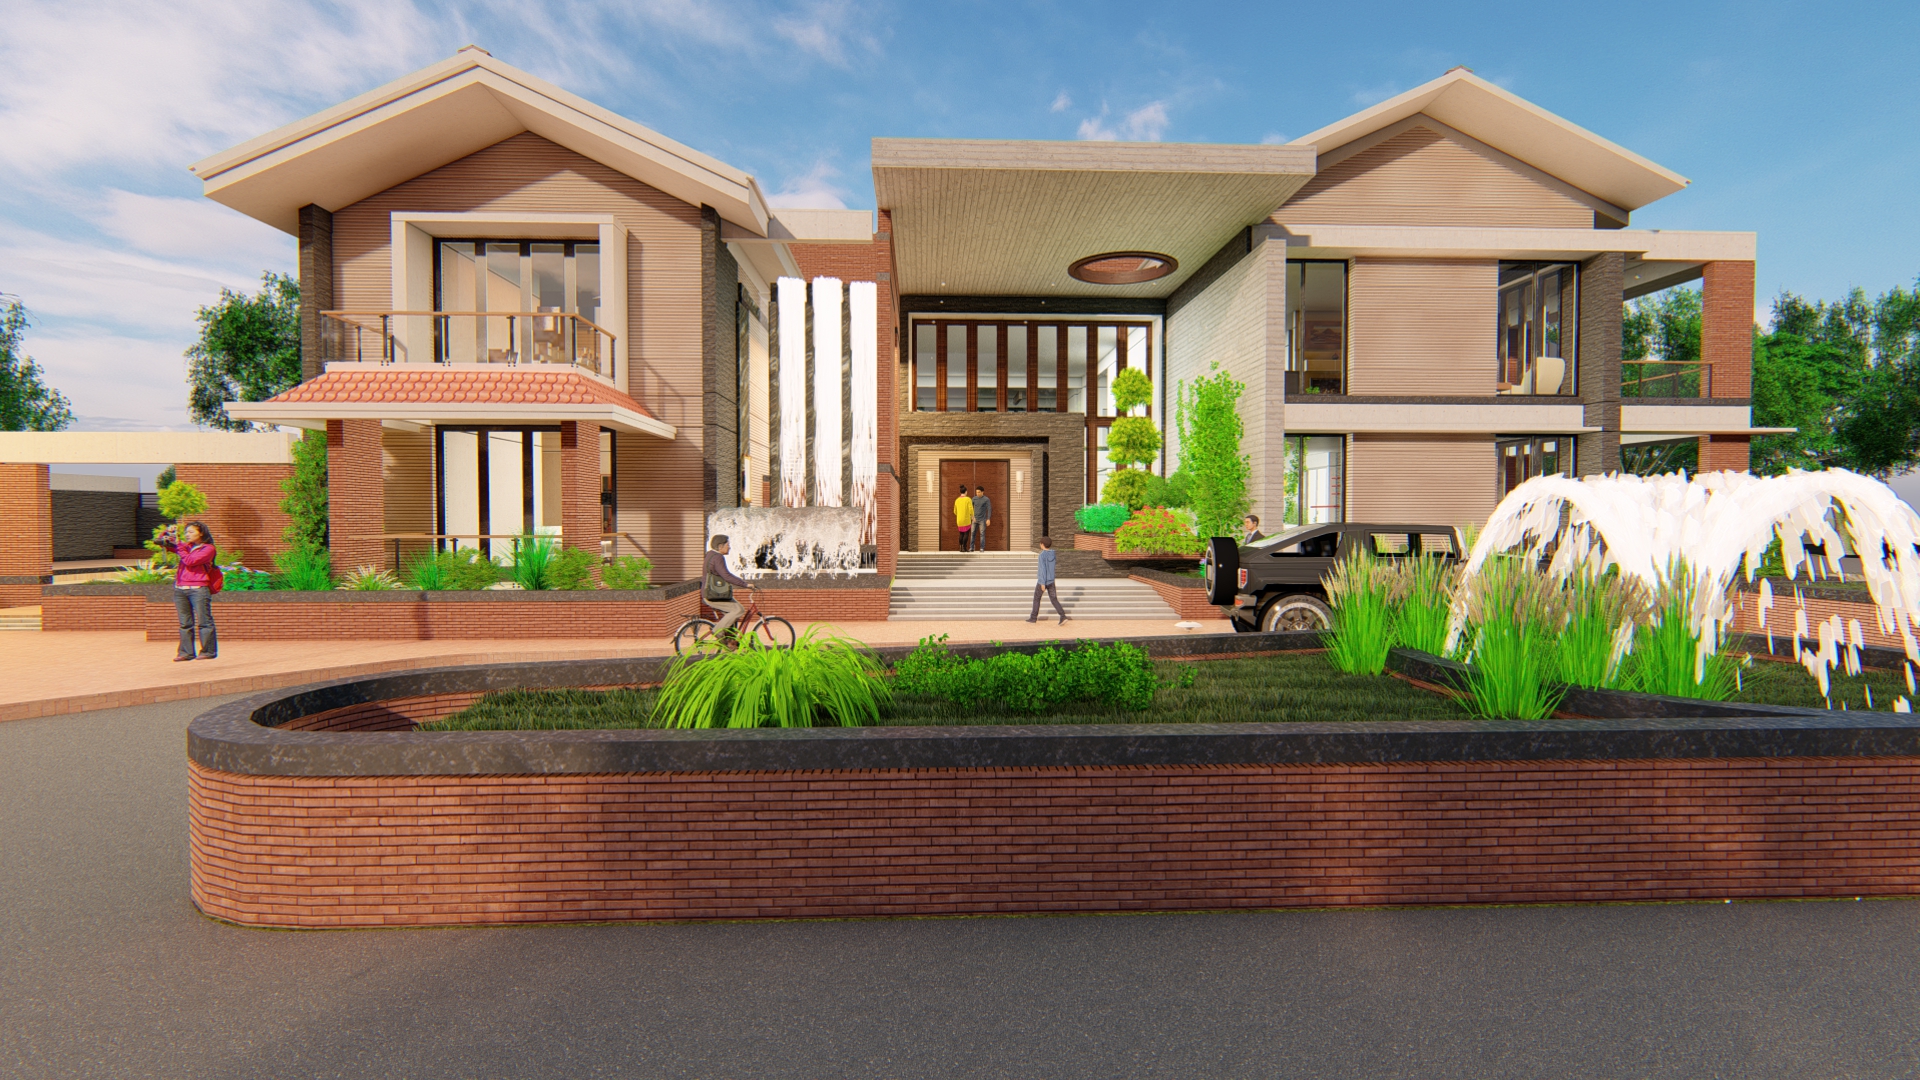 MD RESIDENCE dans 3d max Other image